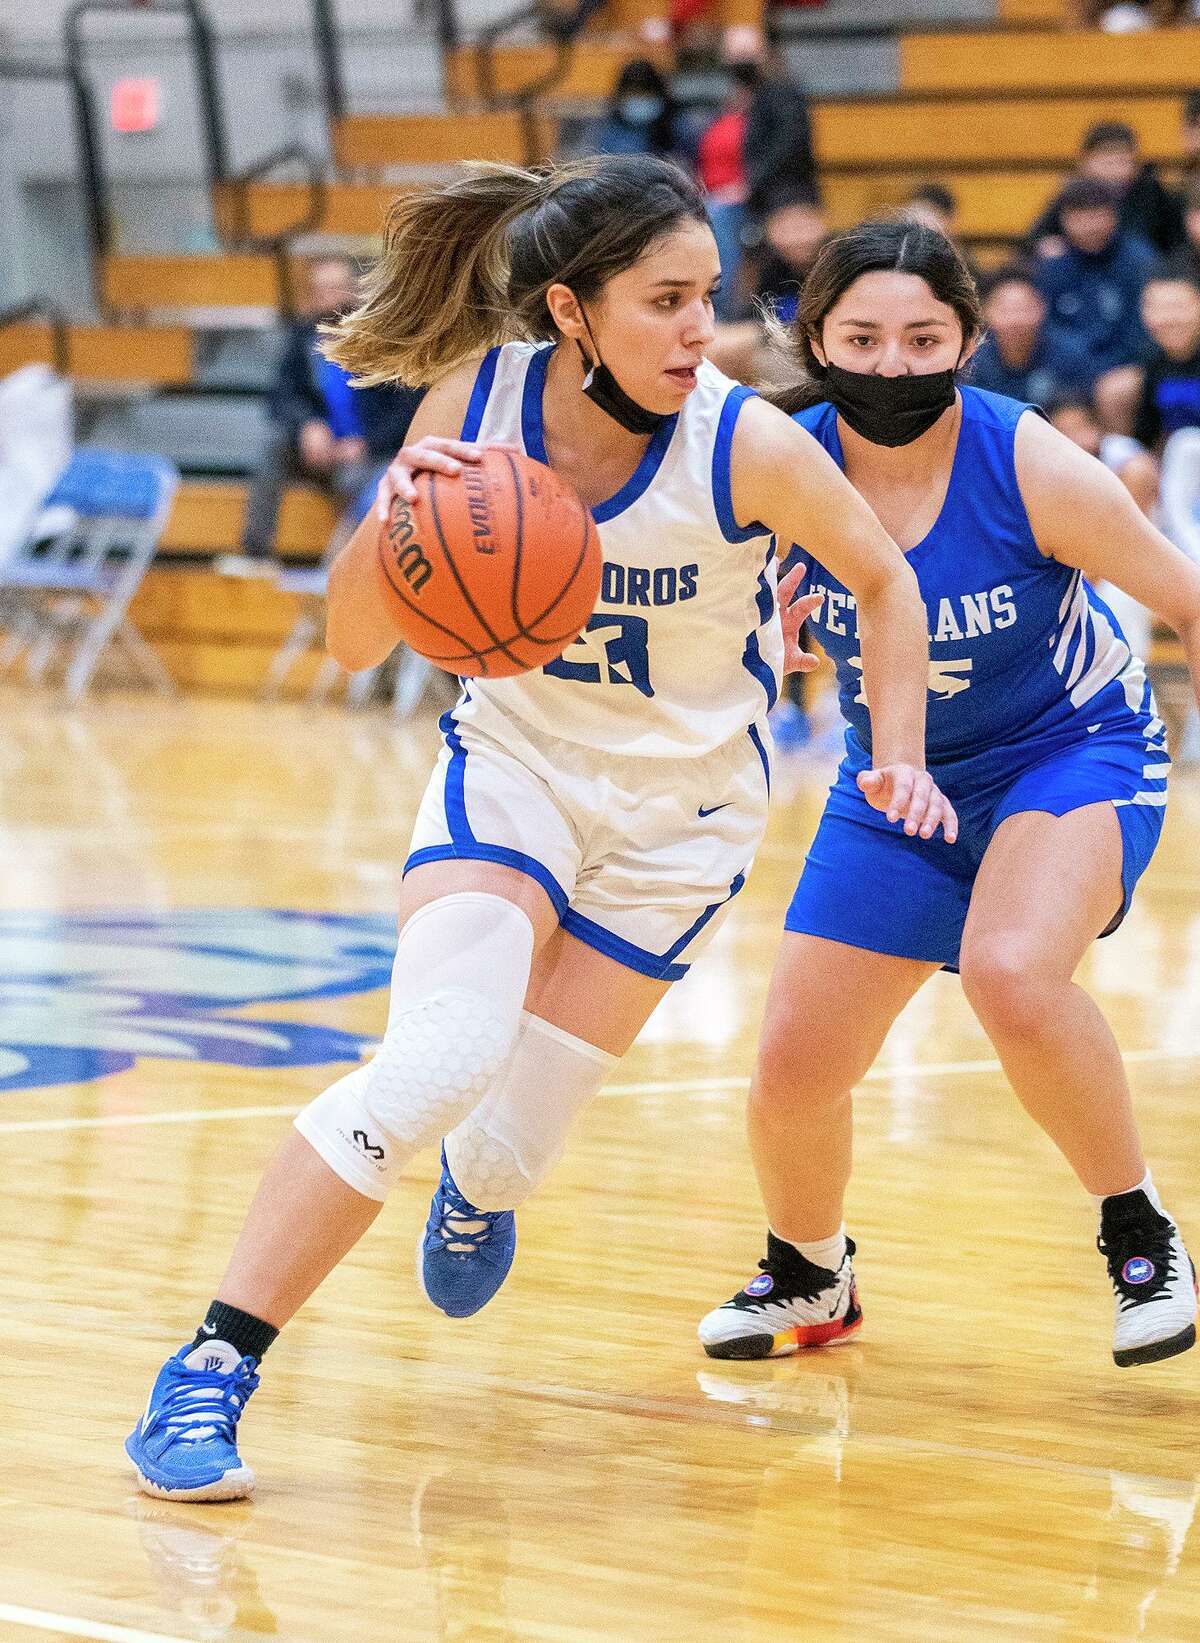 Briana Mariscal drives to the basket during a game against Veterans Memorial High School, Saturday, Jan. 22, 2022.